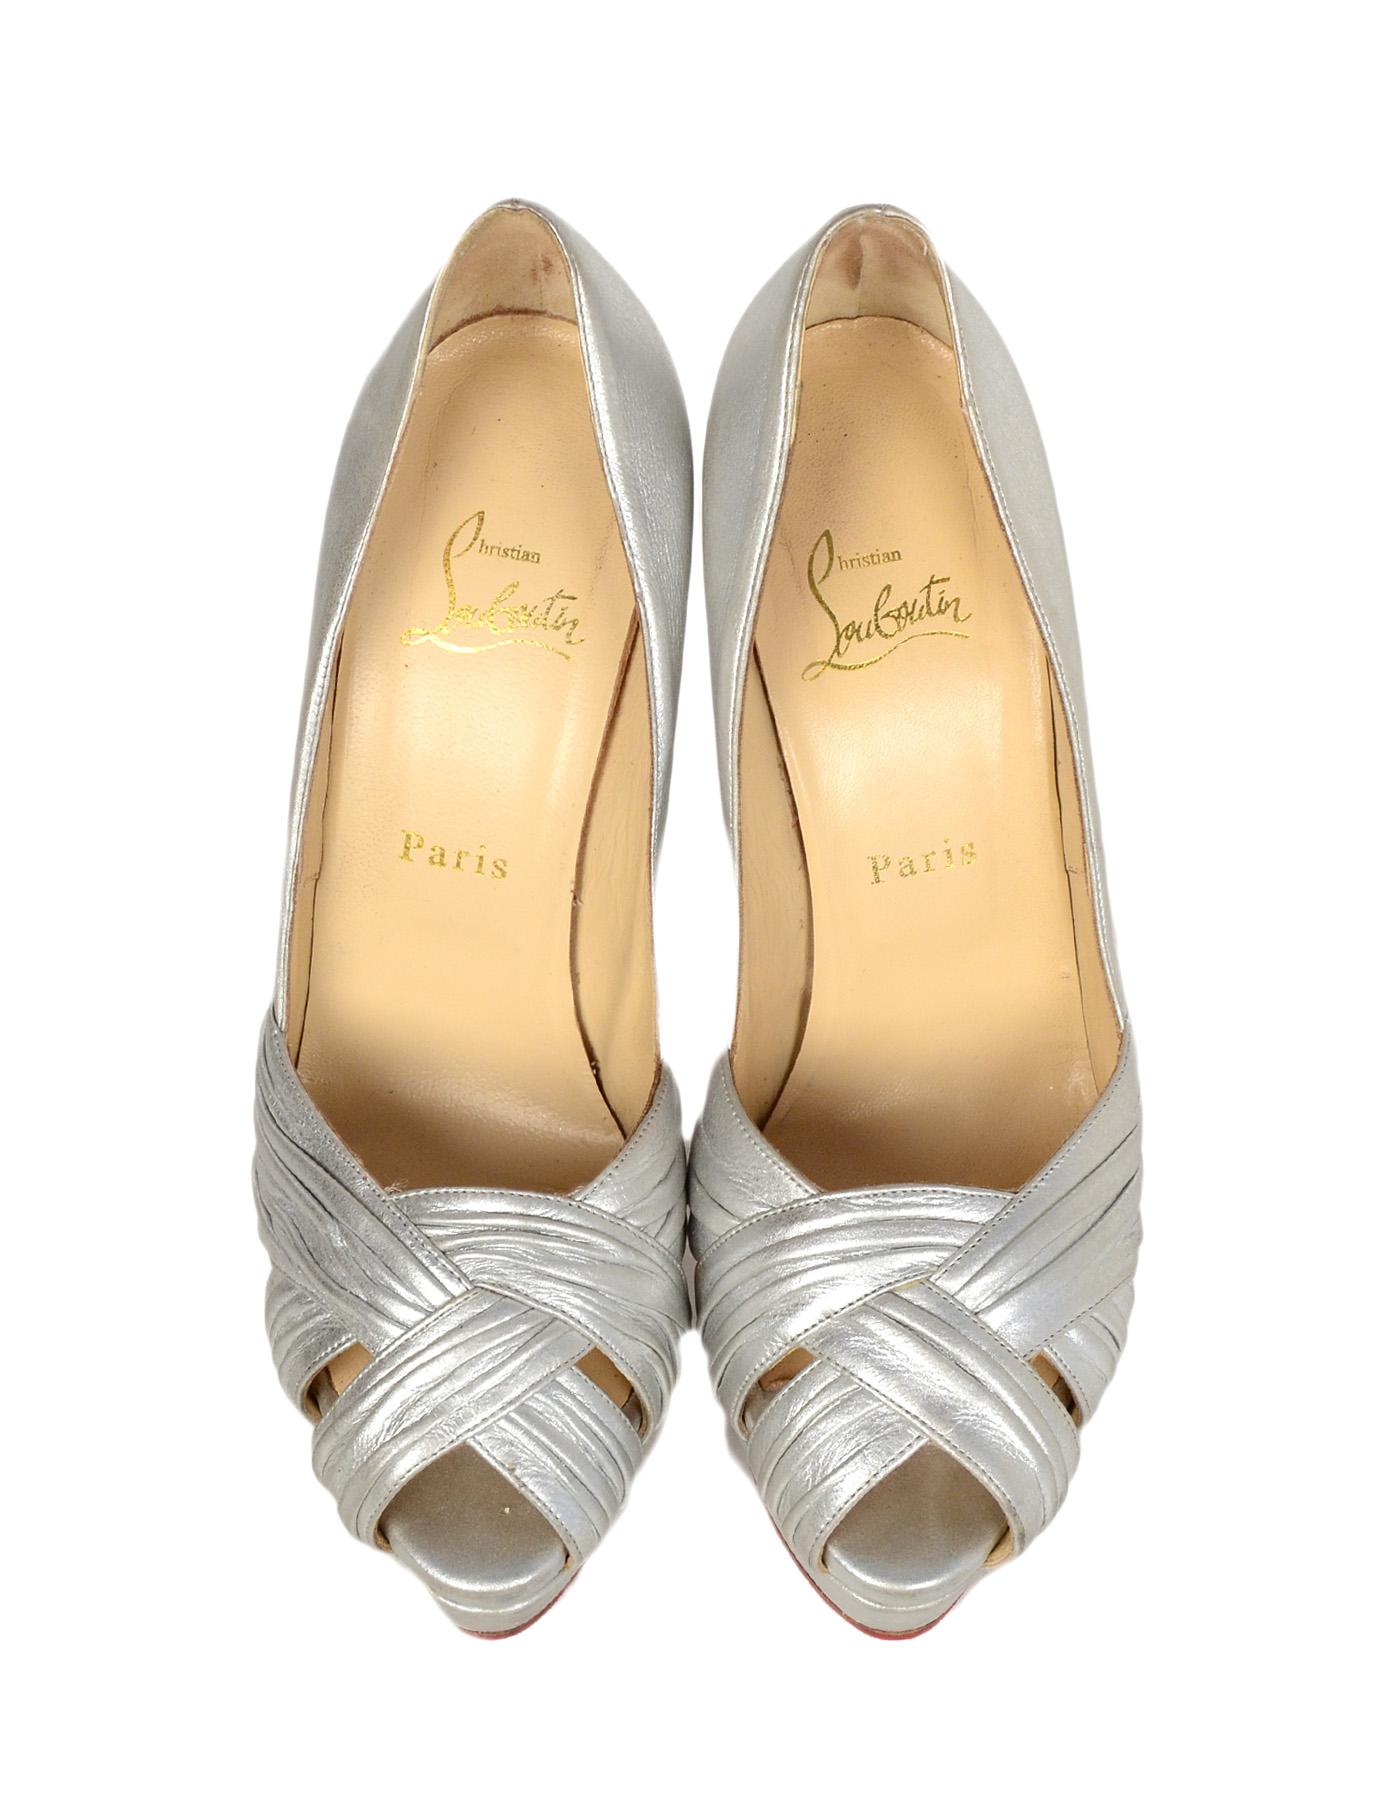 Christian Louboutin Silver Leather Aborina 150 Platform Peep Toe Pumps sz 39

Made In: Italy
Color: Metallic Silver
Hardware: None
Materials: Leather
Closure/Opening: Slide on
Overall Condition: Good pre-owned condition.  Wear throughout leather,